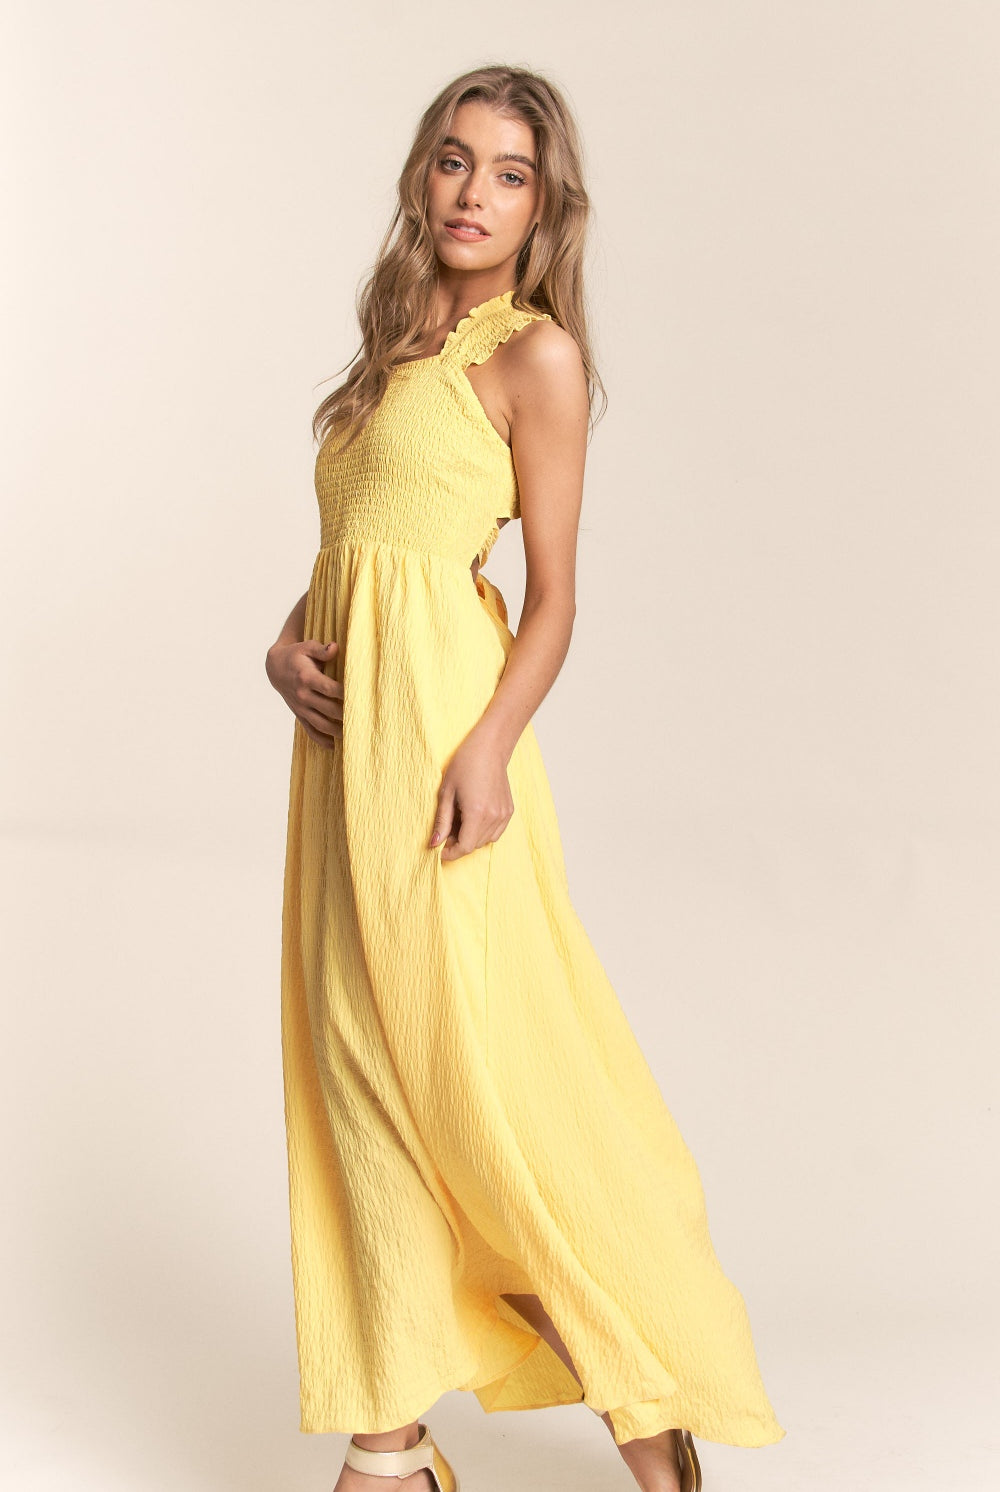 A woman glances over her shoulder, wearing a sunny yellow maxi dress with a unique ruffle detail running asymmetrically across the back. The dress ties at the lower back, creating an elegant bow that enhances the feminine silhouette. Its crinkled texture adds a bohemian flair to the design, perfect for summer days or a tropical getaway.